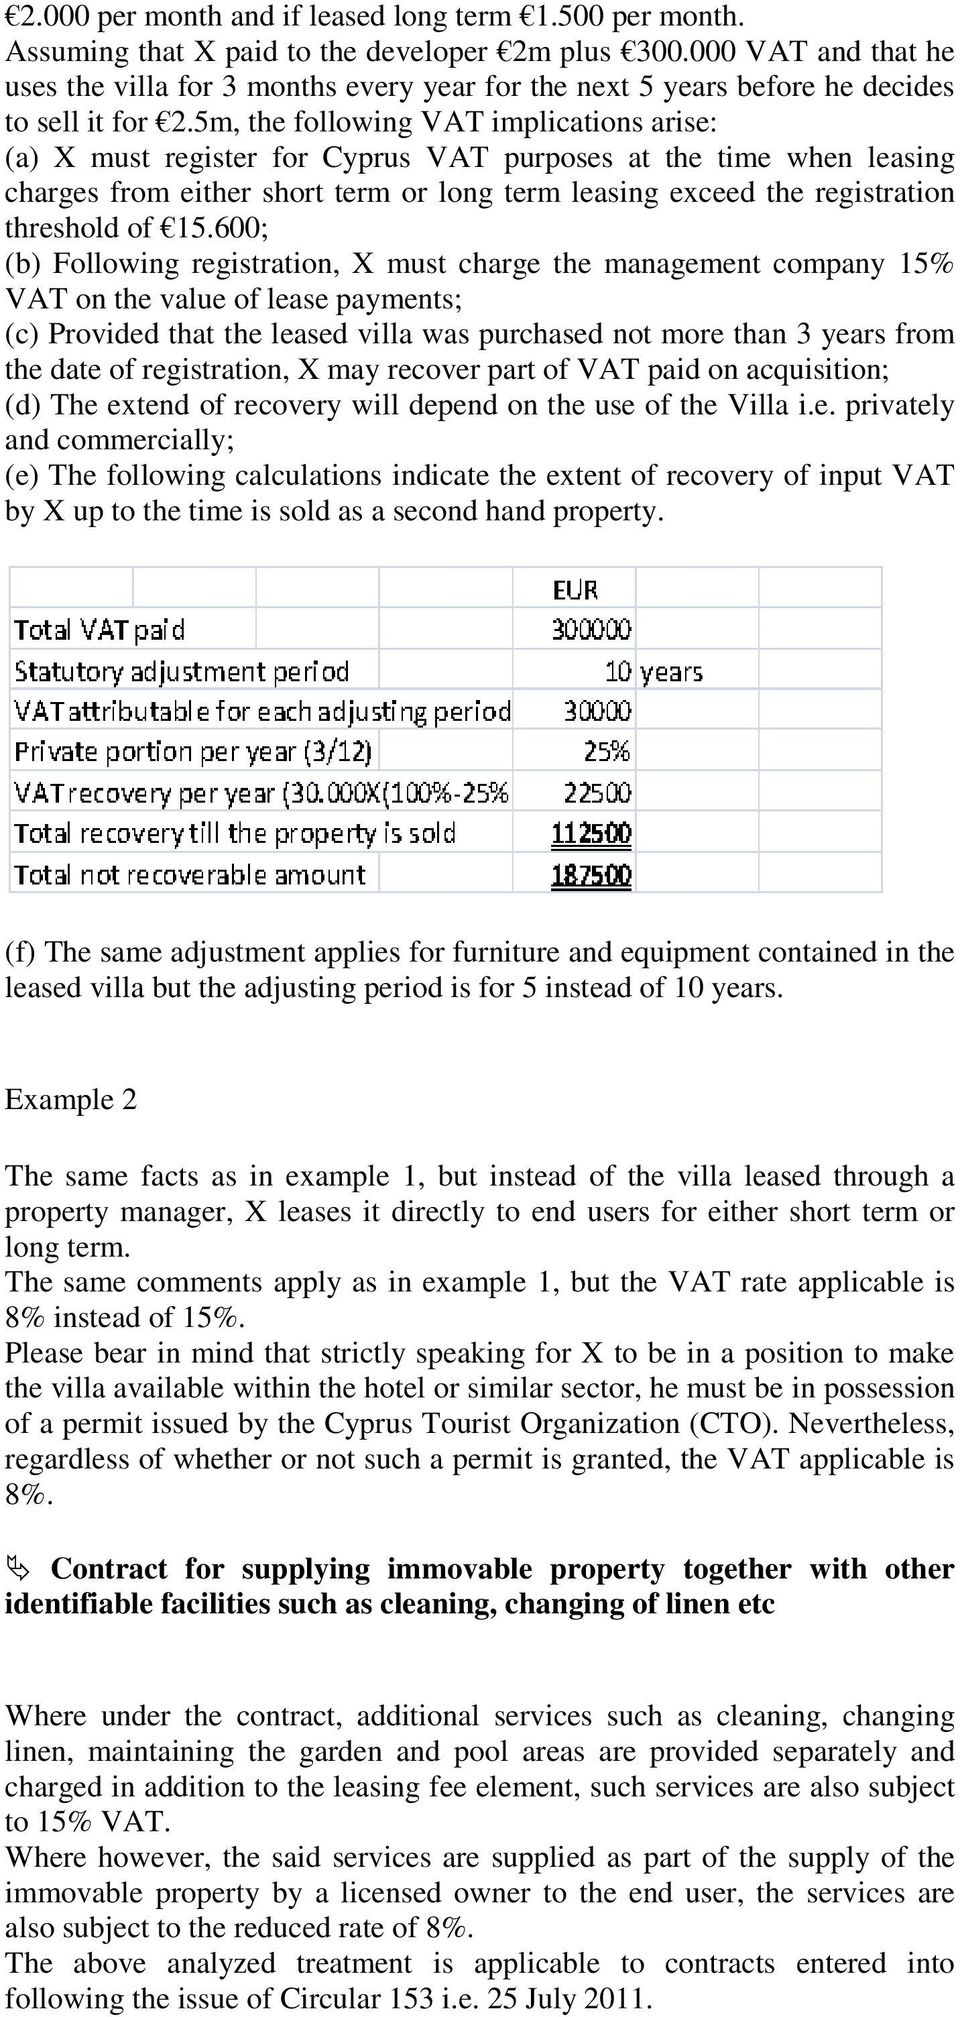 5m, the following VAT implications arise: (a) X must register for Cyprus VAT purposes at the time when leasing charges from either short term or long term leasing exceed the registration threshold of